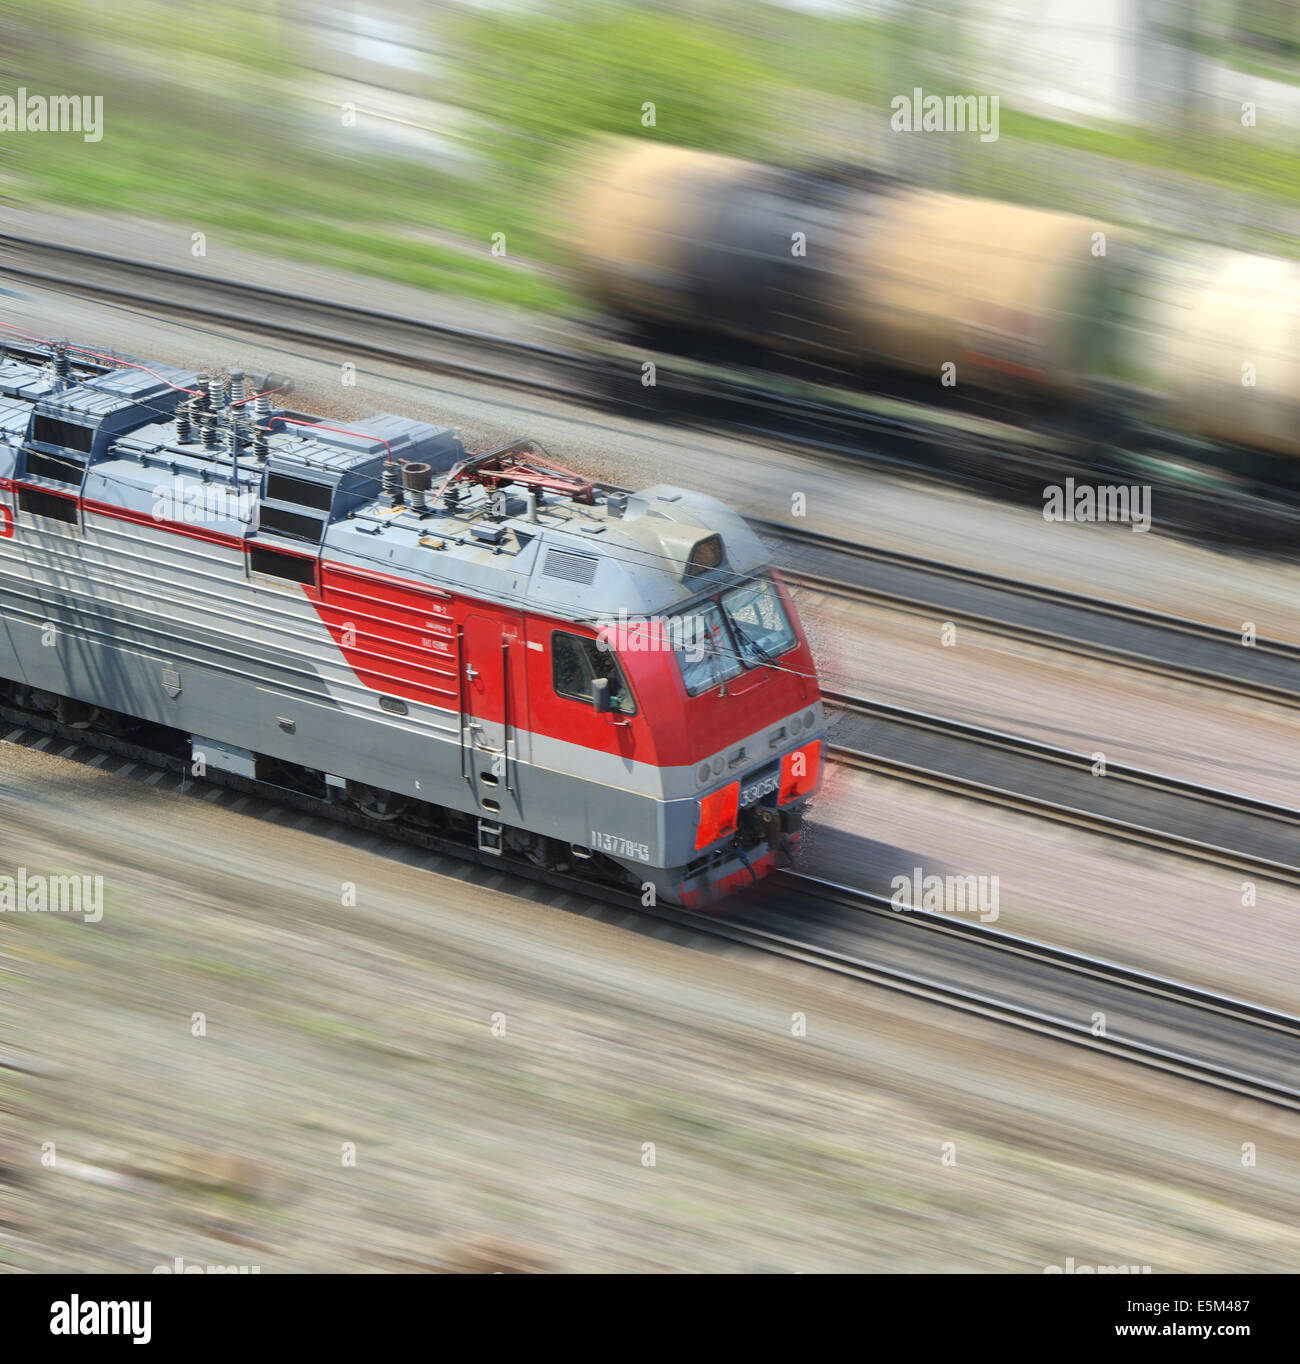 train in motion on the background of railway wagons Stock Photo